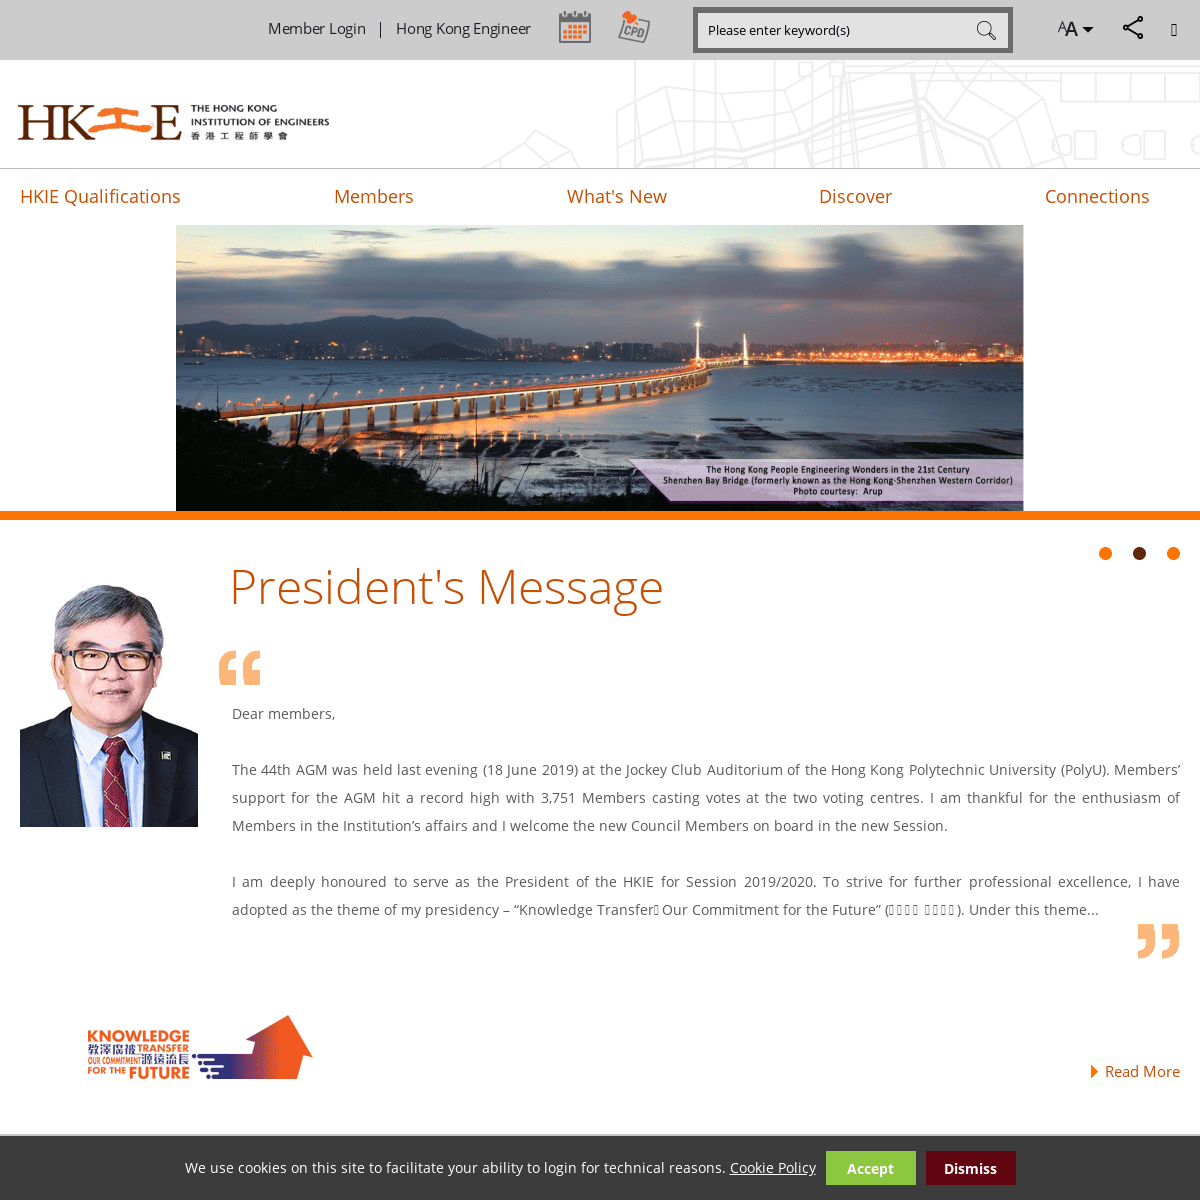 A complete backup of hkie.org.hk